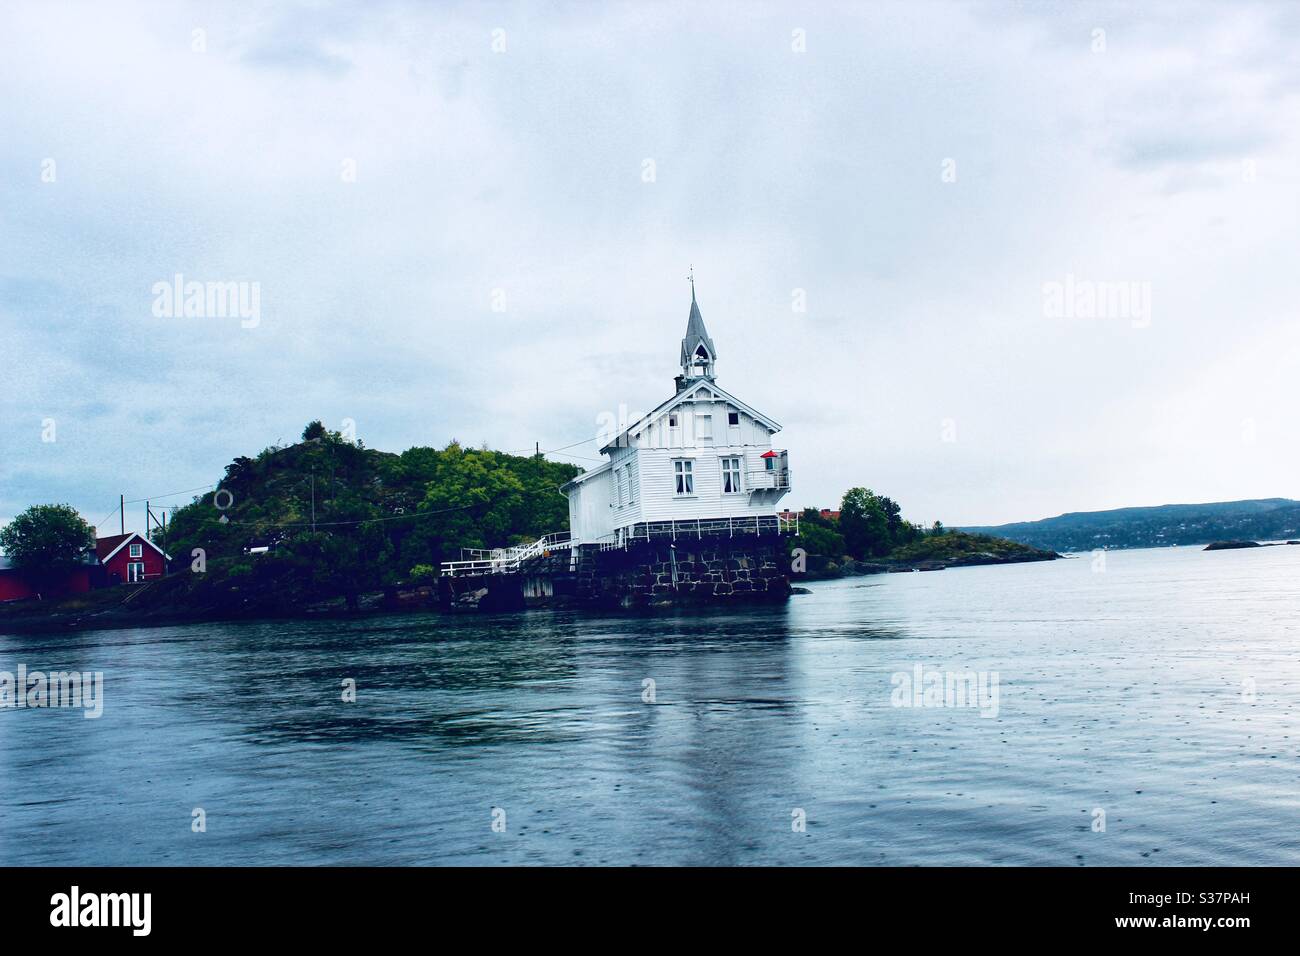 Rural church on landing in Norway surrounded by water Stock Photo